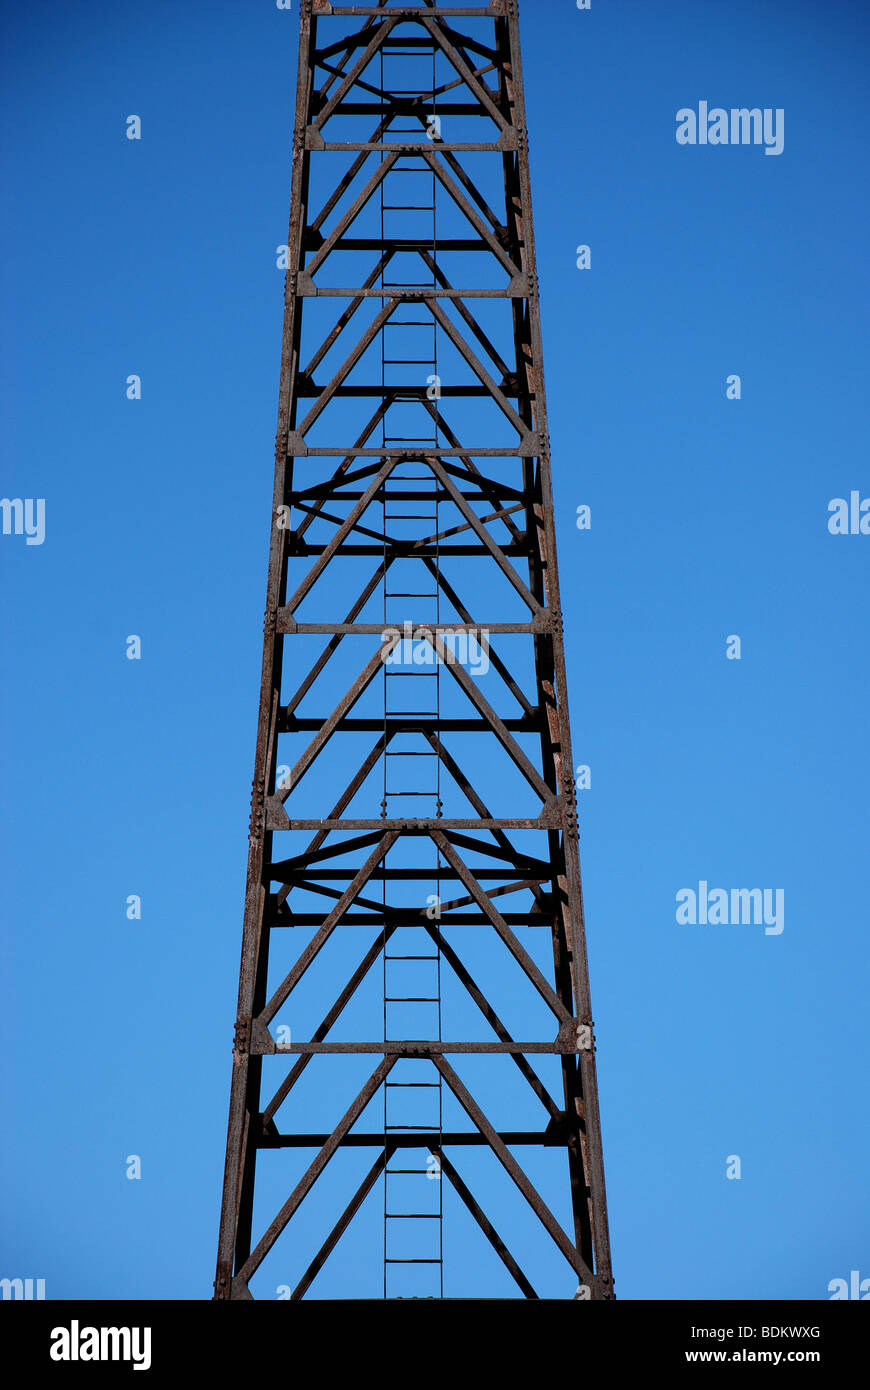 Metal, light tower on a pier at the shore of Lake Michigan, Chicago, IL, USA Stock Photo